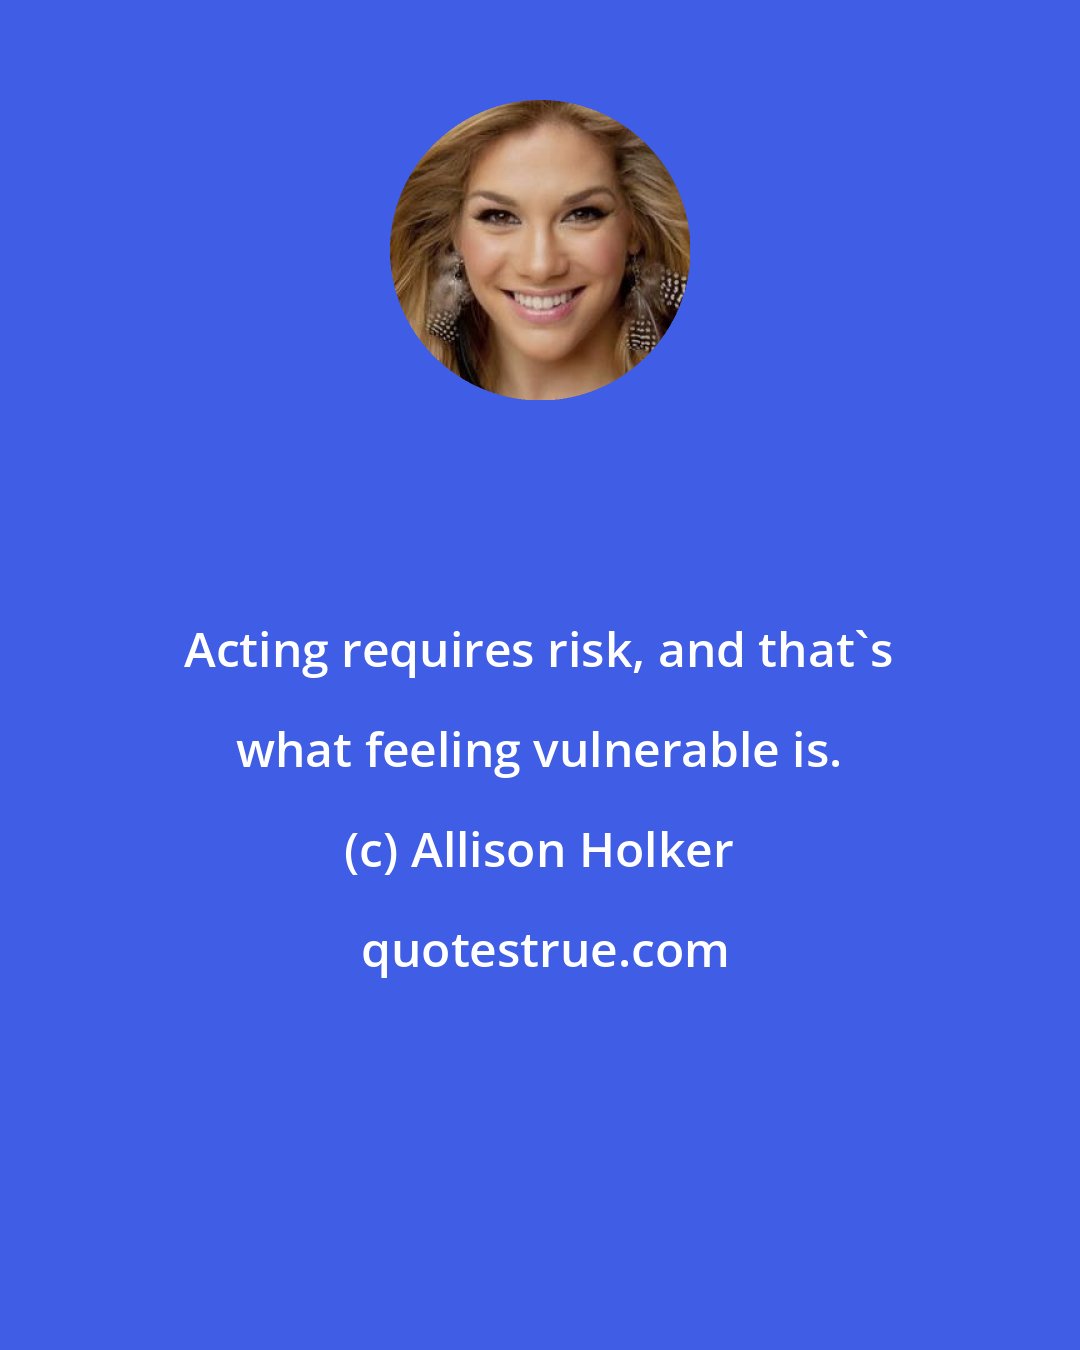 Allison Holker: Acting requires risk, and that's what feeling vulnerable is.